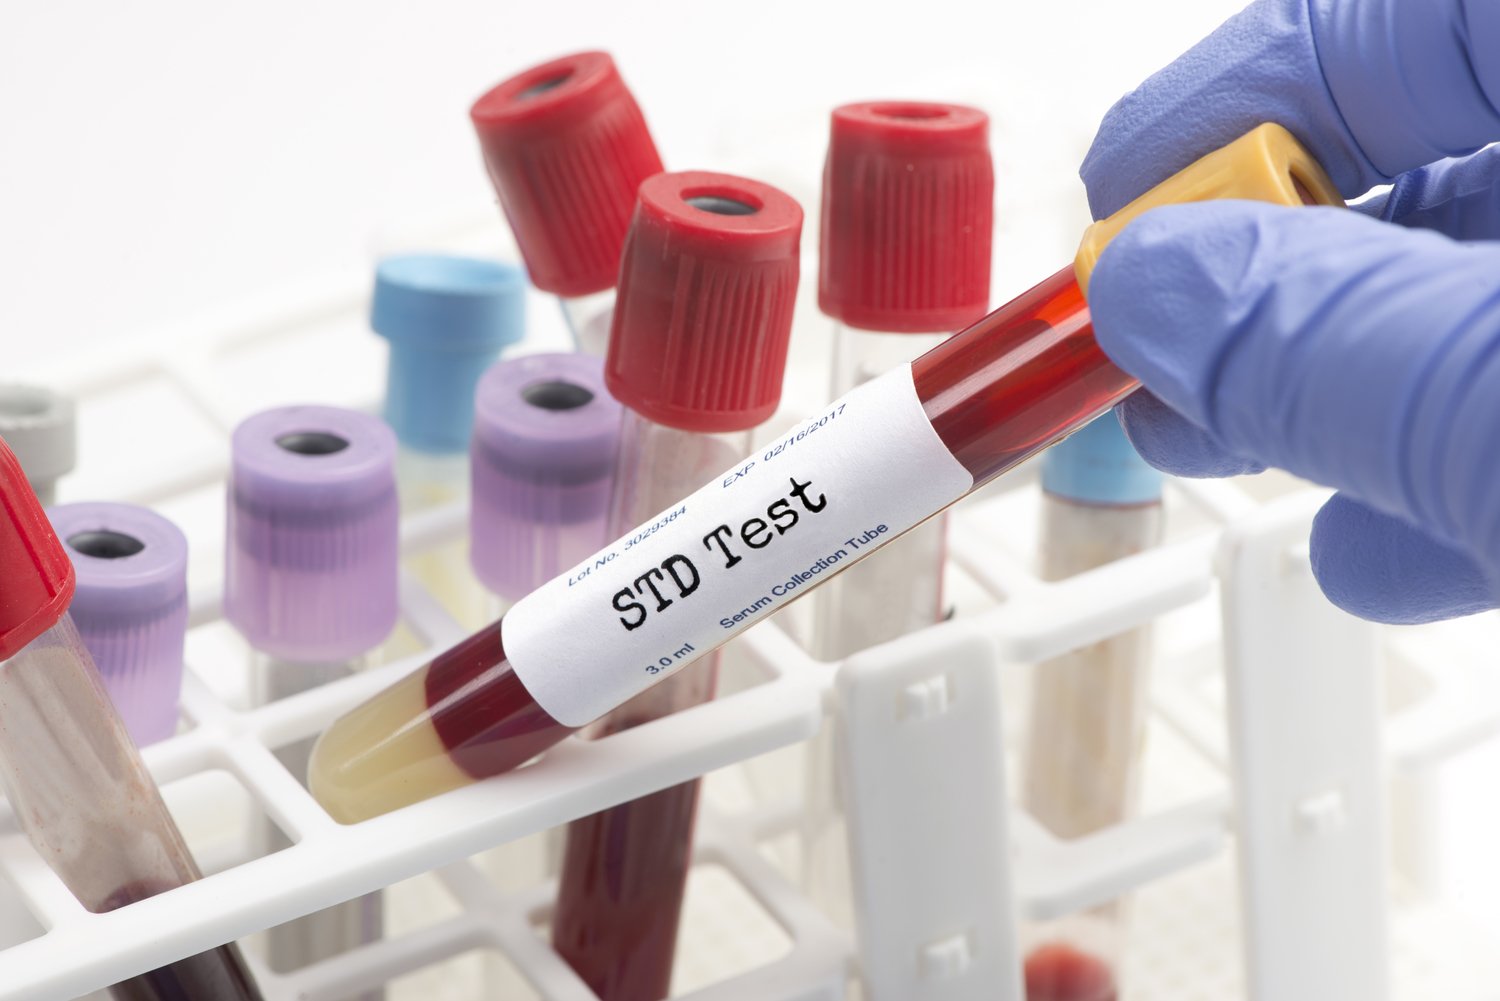 Why Use an in Home STD Test Kit?